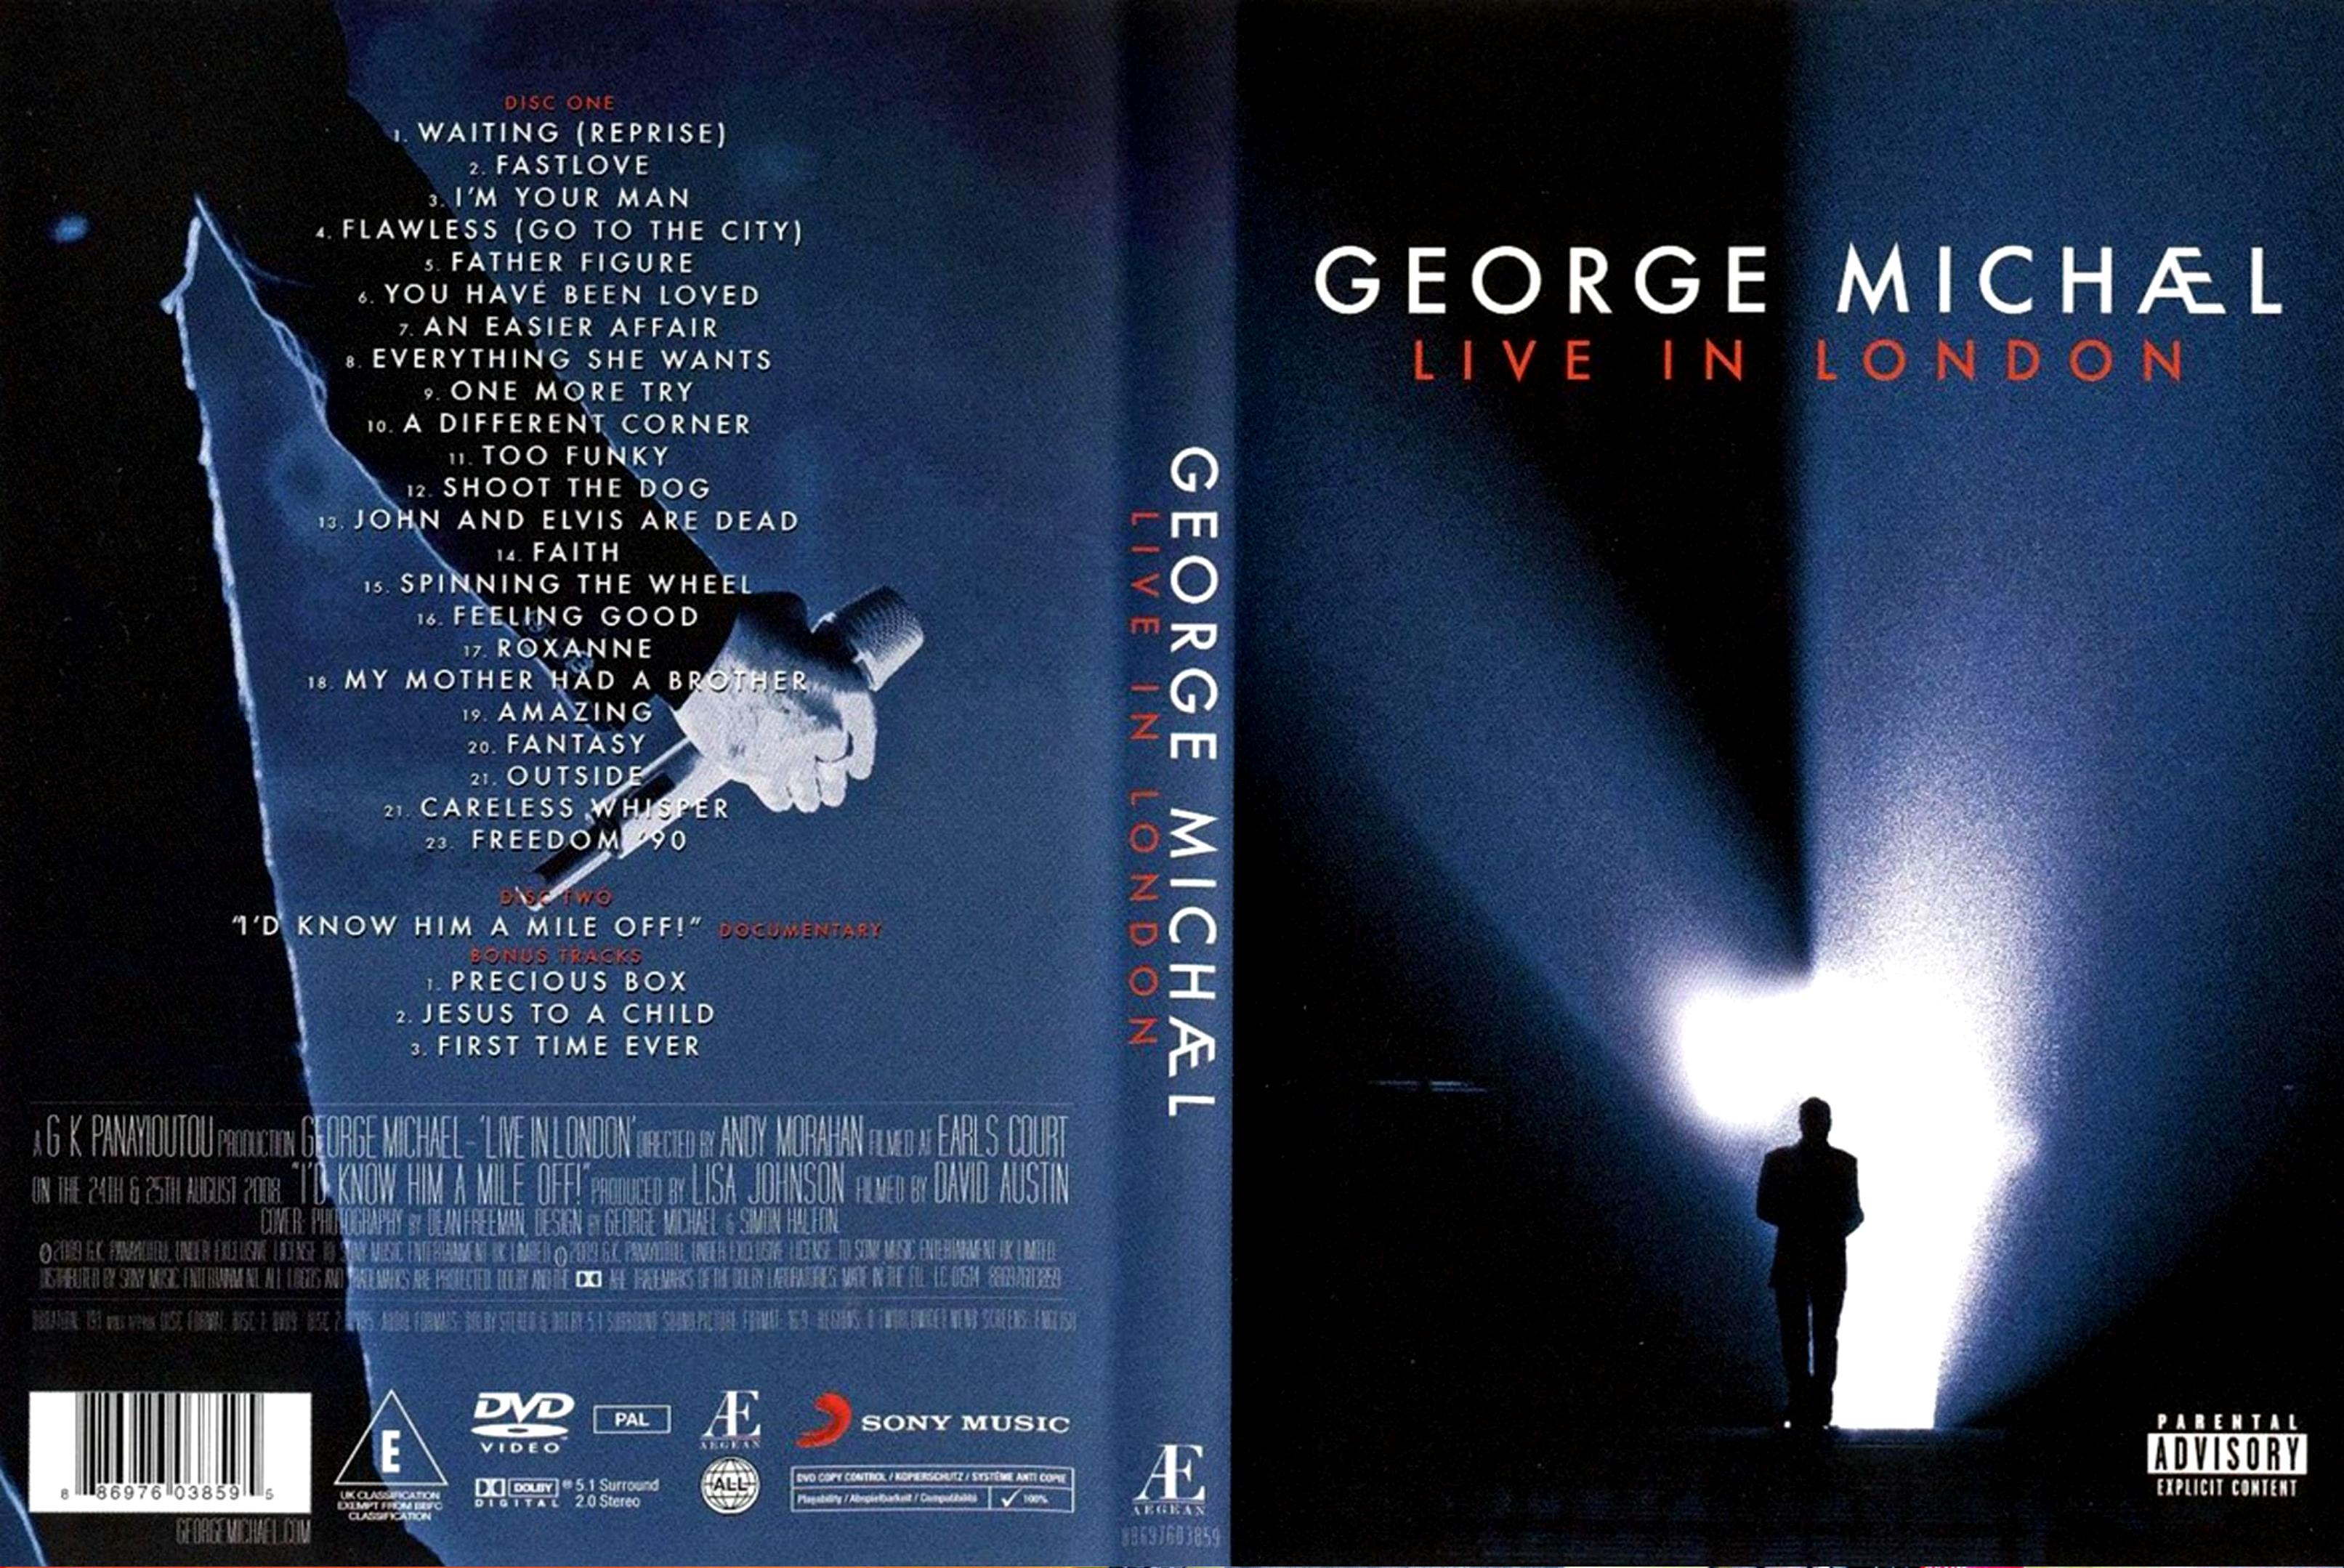 Jaquette DVD George Michael live in london